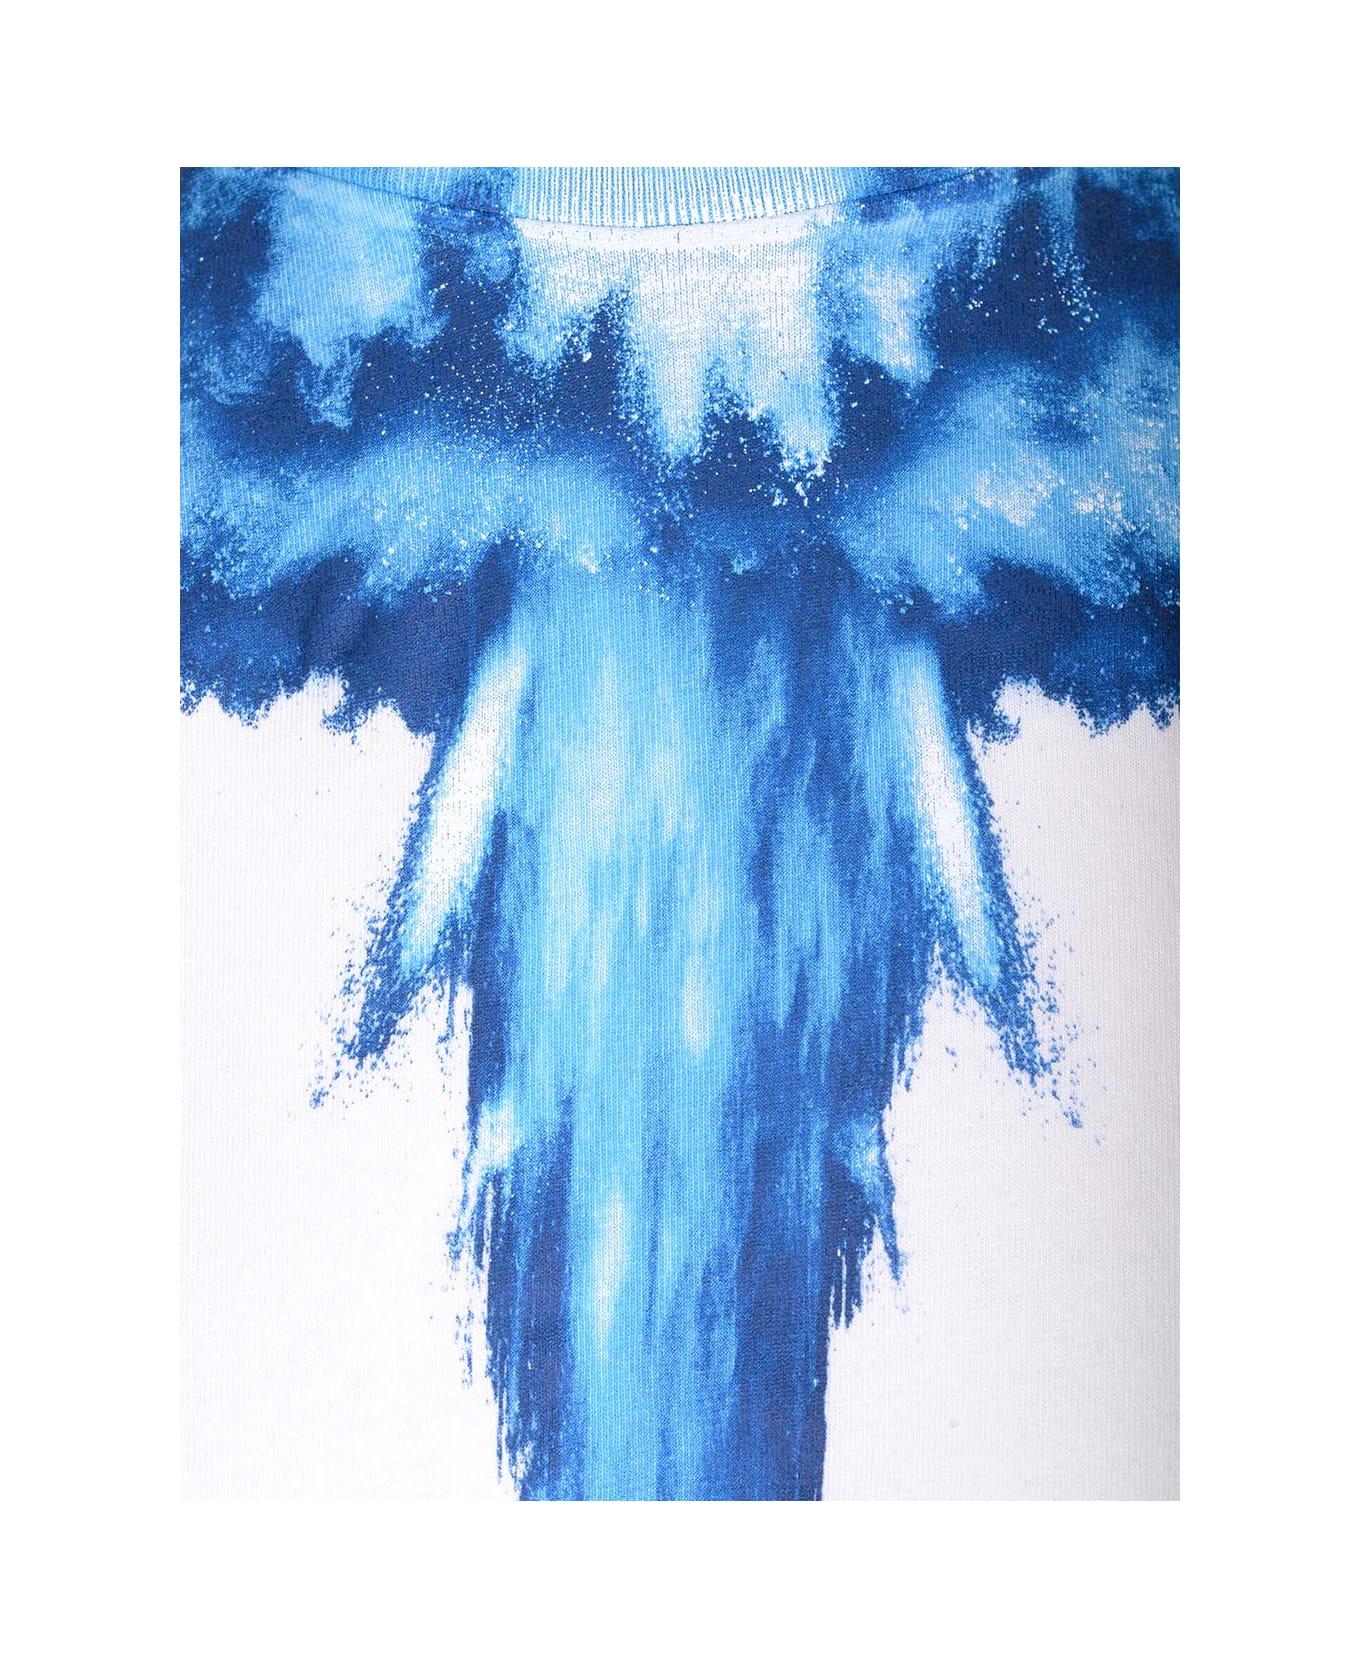 Marcelo Burlon T-shirt With Colordust Wings Print - White